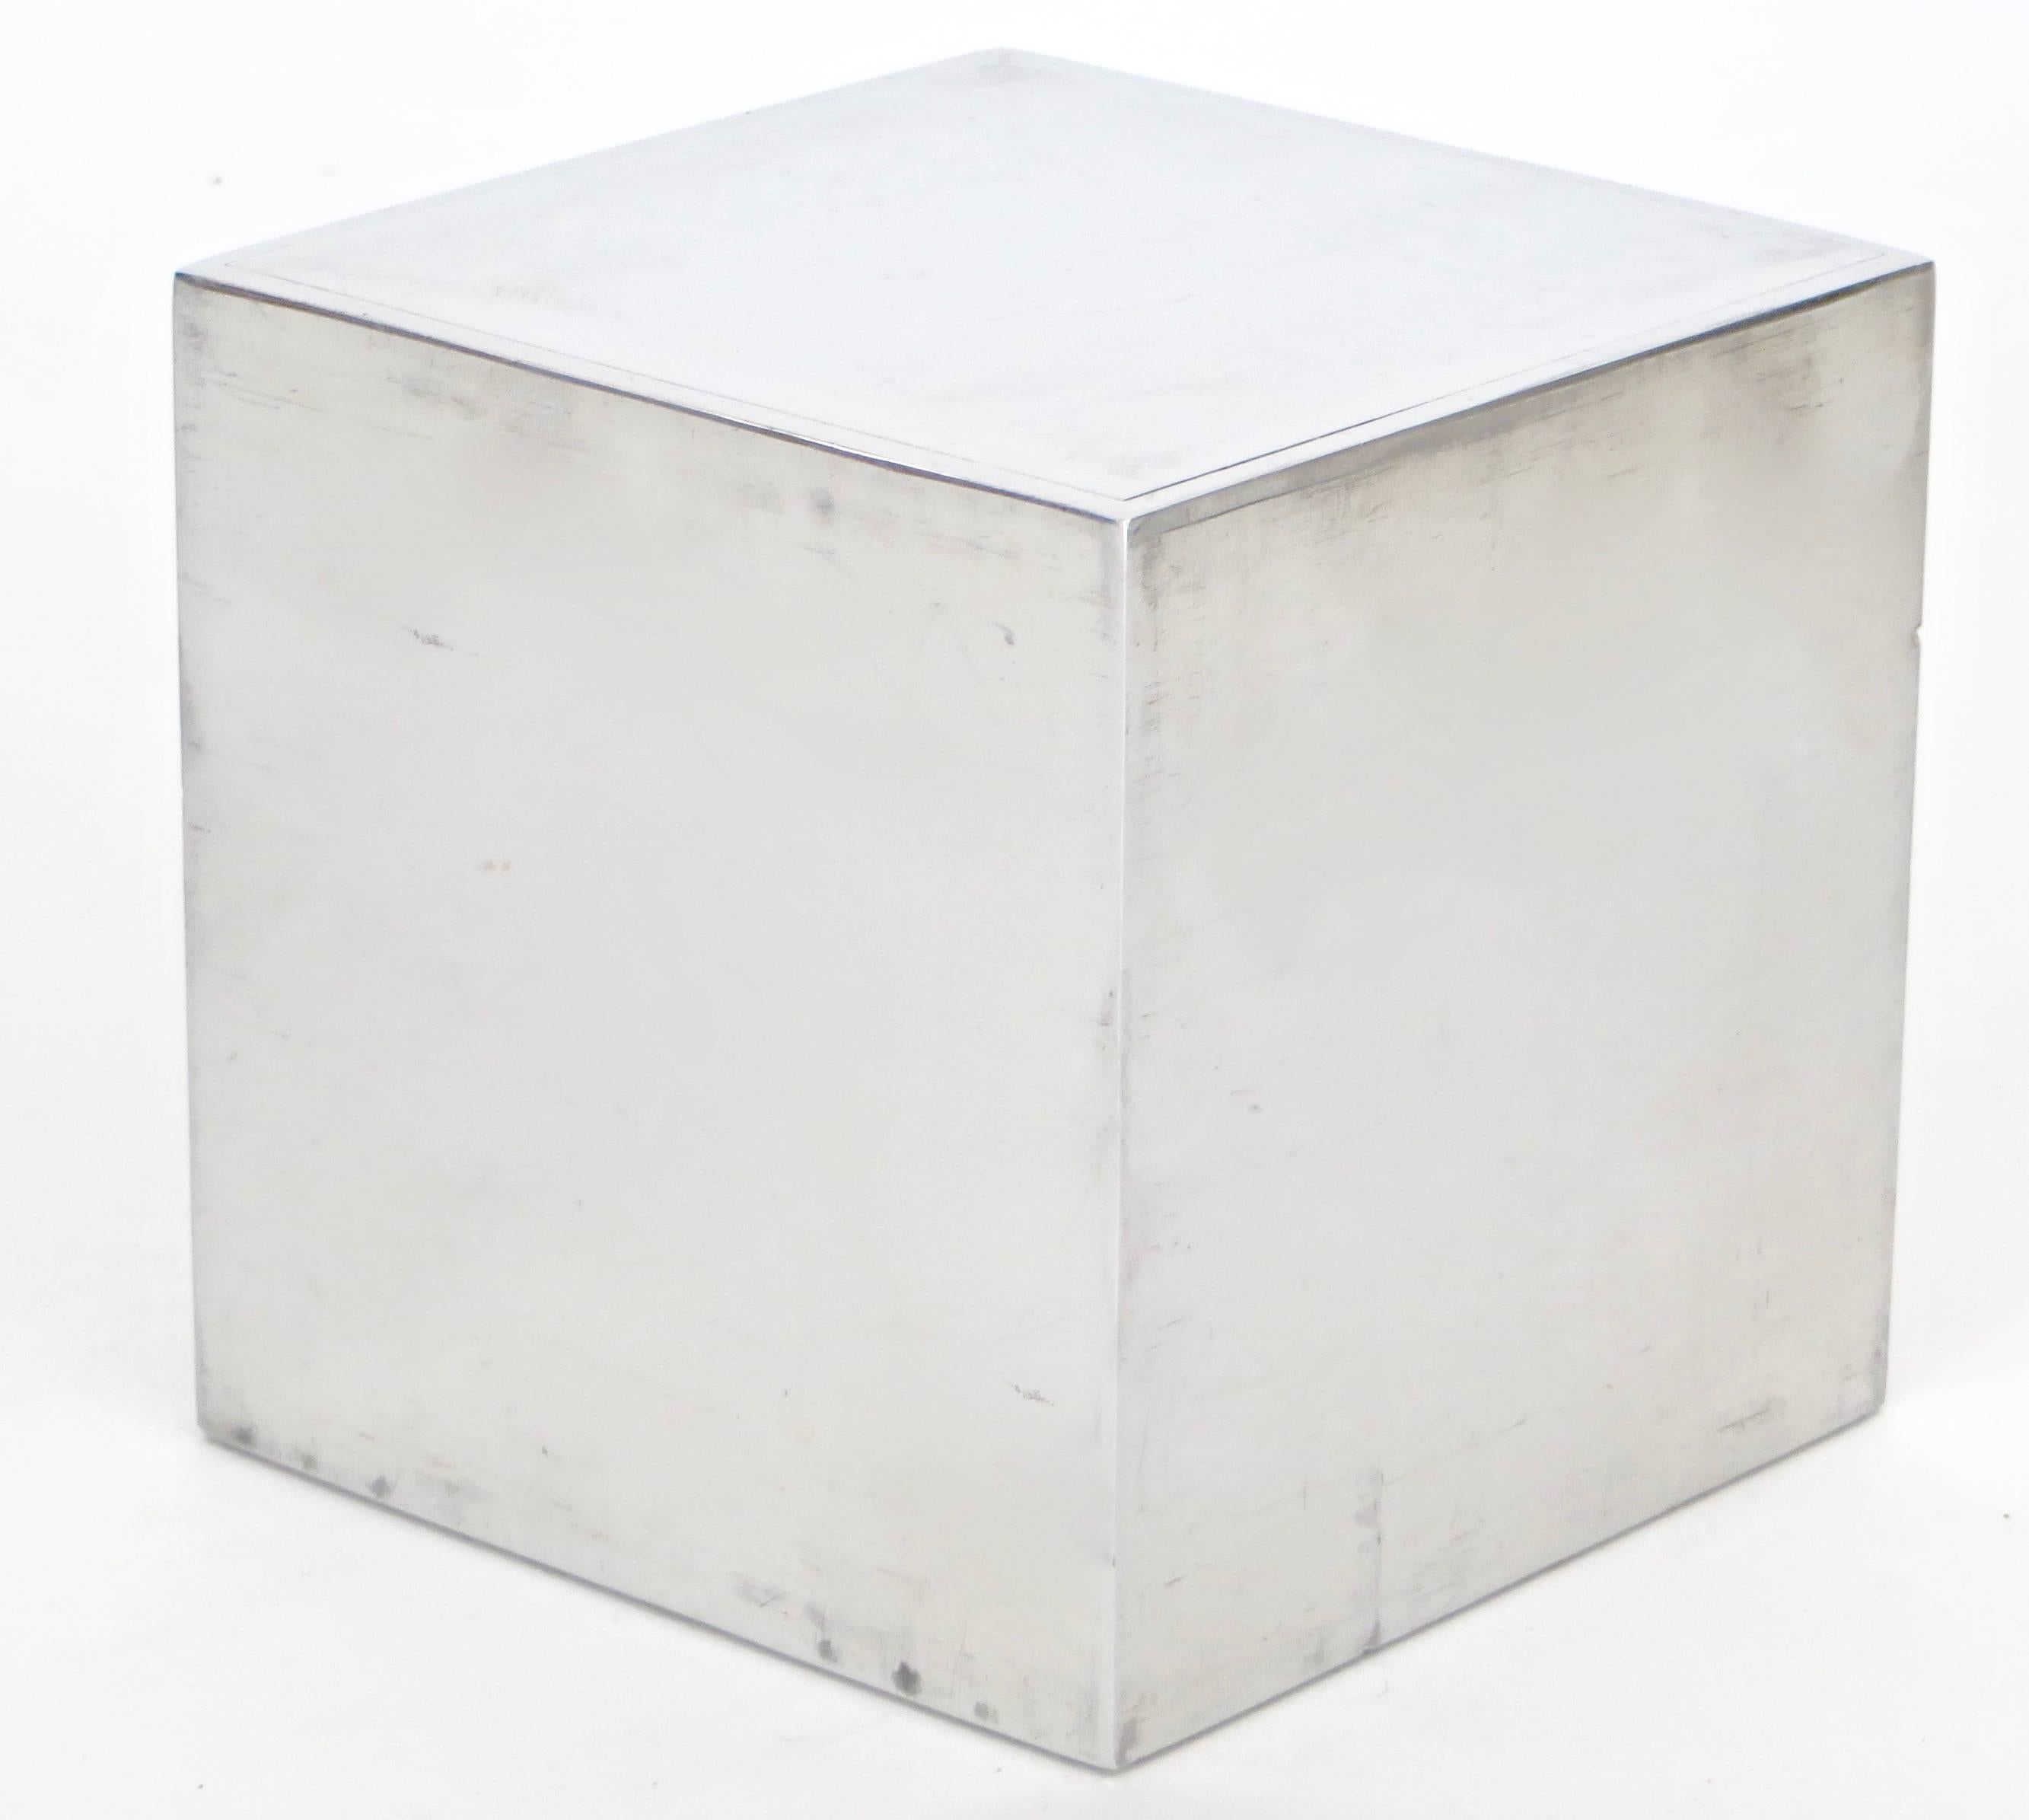 A Design Line nickeled chrome cube sculptural object. 
Design Line was a company created by Bill and Jacqueline Curry in 
El Segundo, California in the 1960s-1970s. 
Producing lighting, objects, furniture and the famous oversize jacks, the line